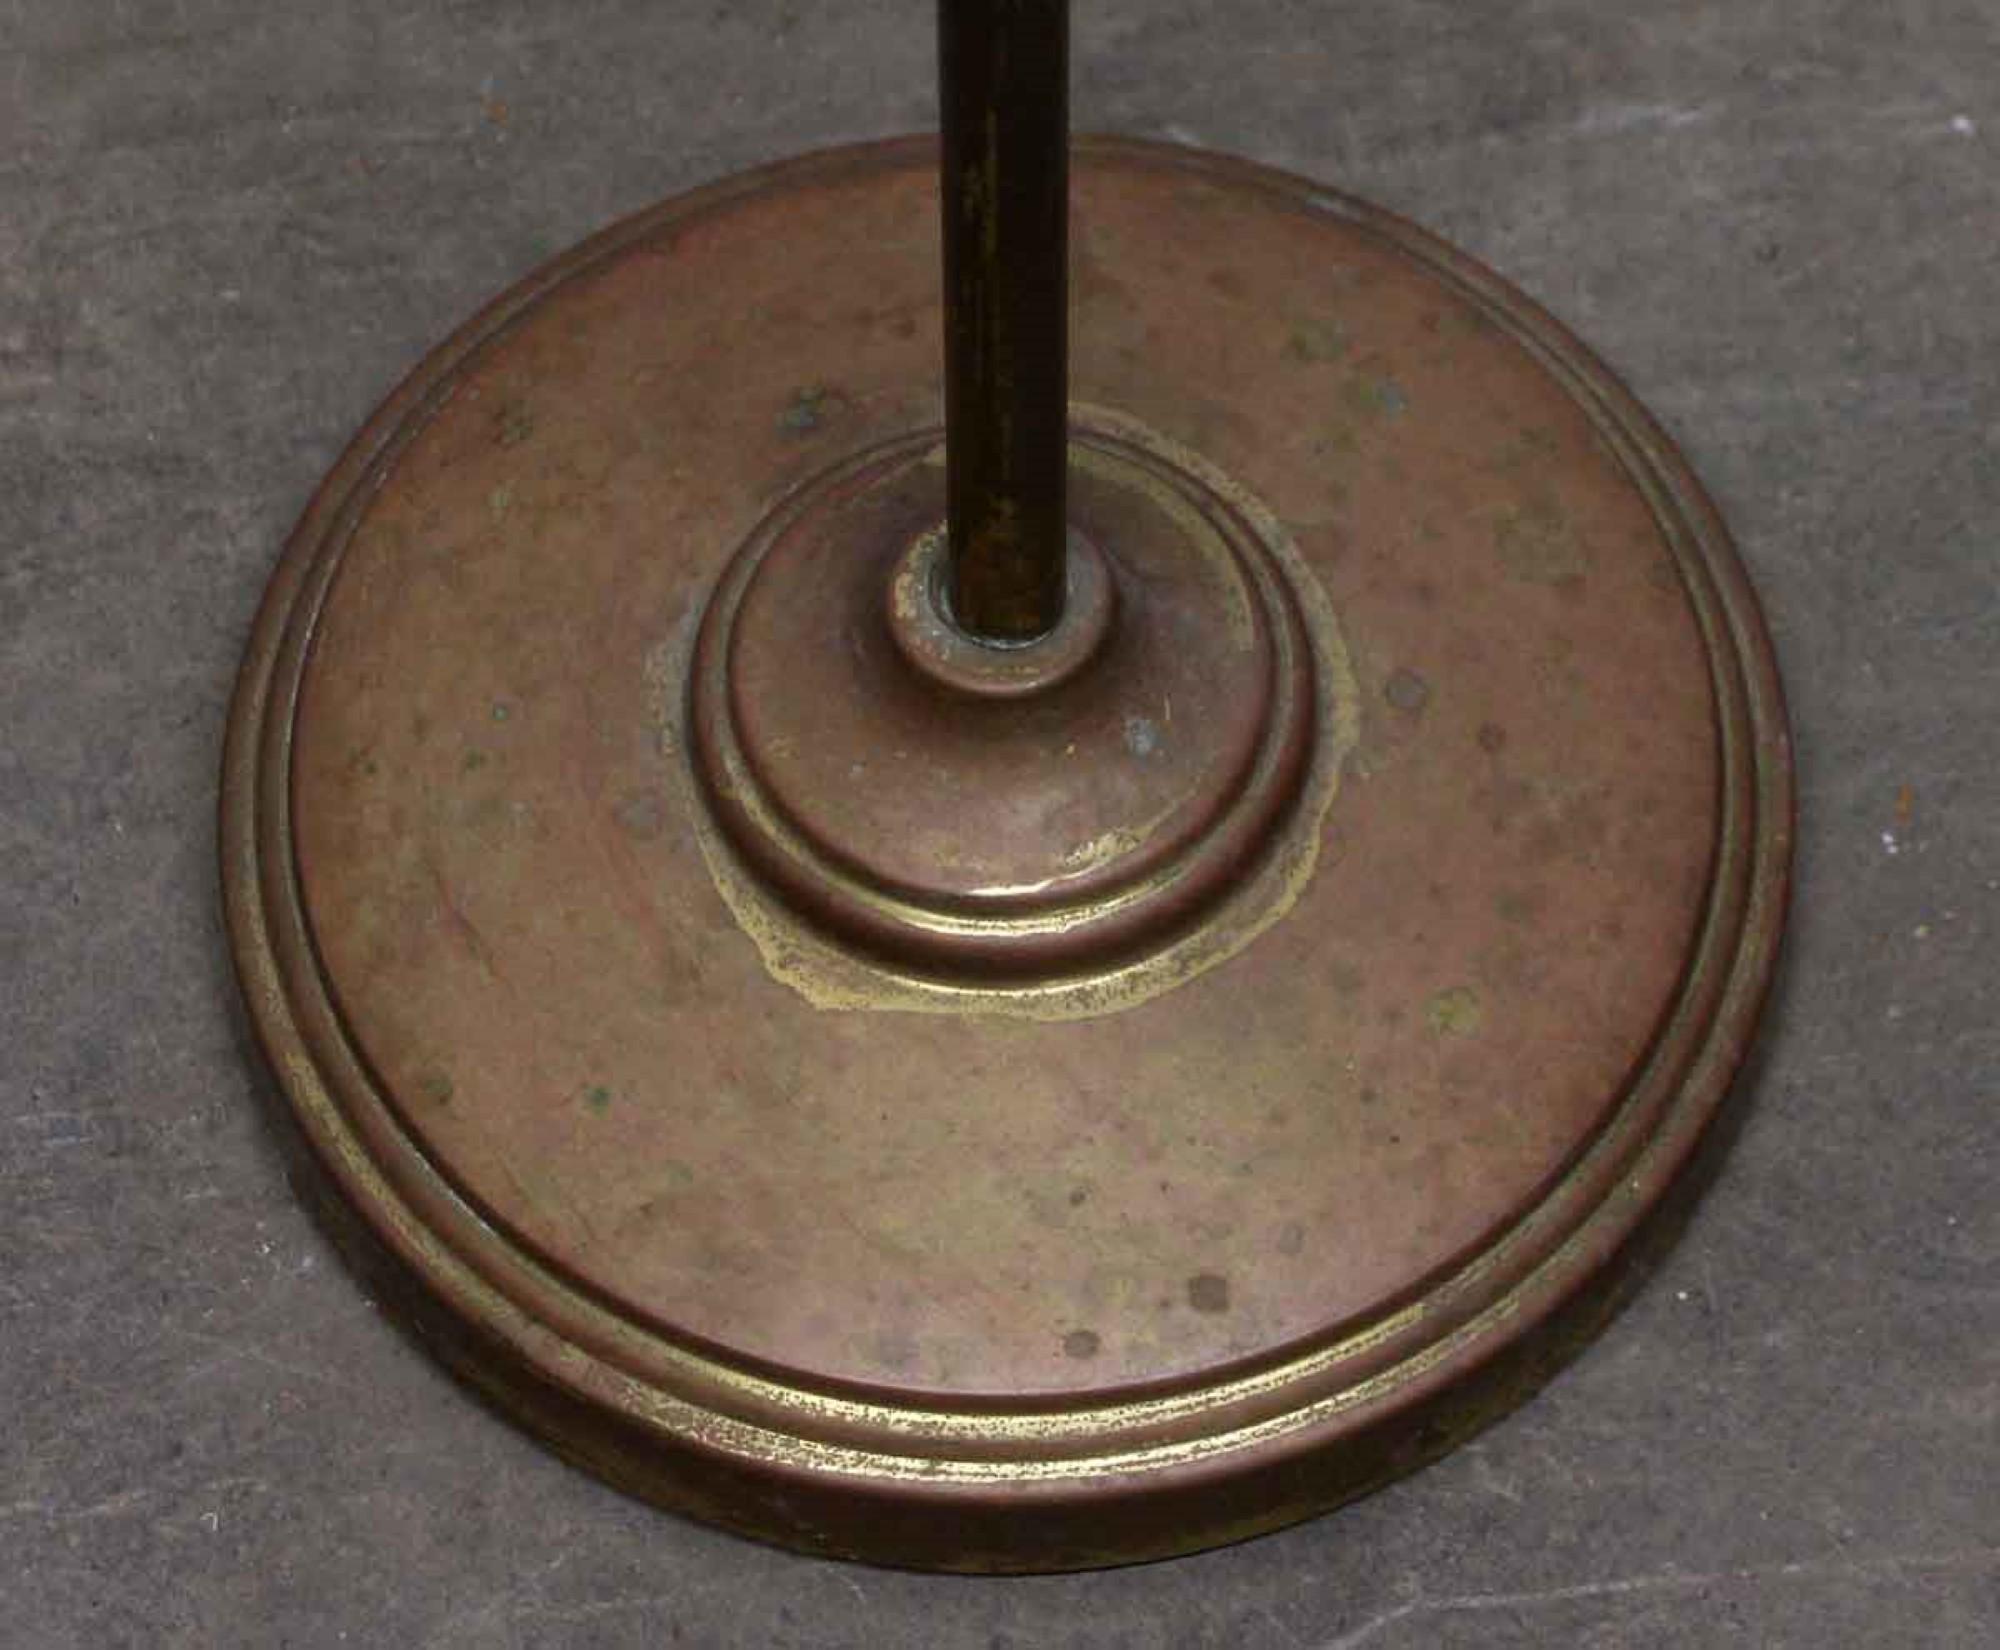 North American 1960s Brass Silent Butler or Valet Men's Suit Stand with 2 Racks Original Patina